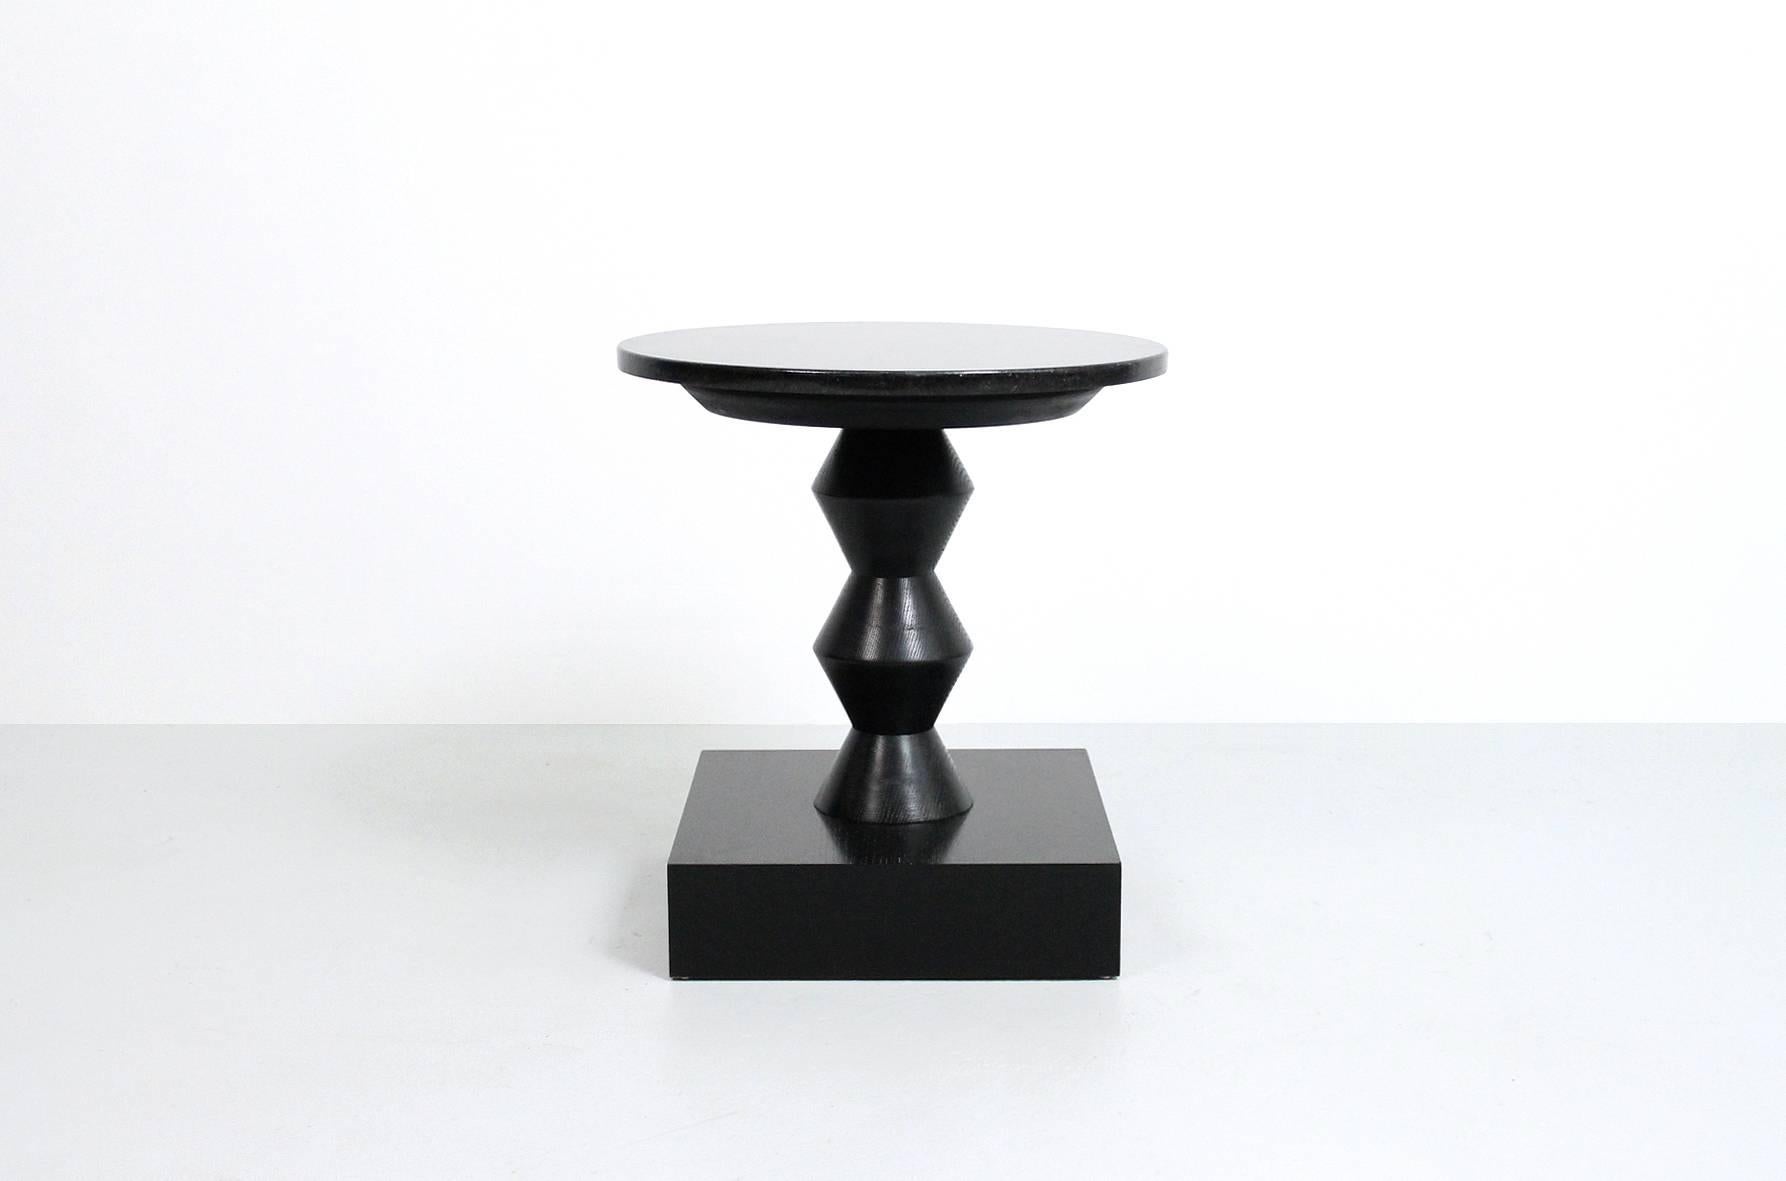 Rare Peter Shire Post Modern side/lamp table with black cerused wooden base and circular granite top. This example comes from a commission of custom Shire designs. The artist has confirmed the authenticity of this piece.

____

We're offering our